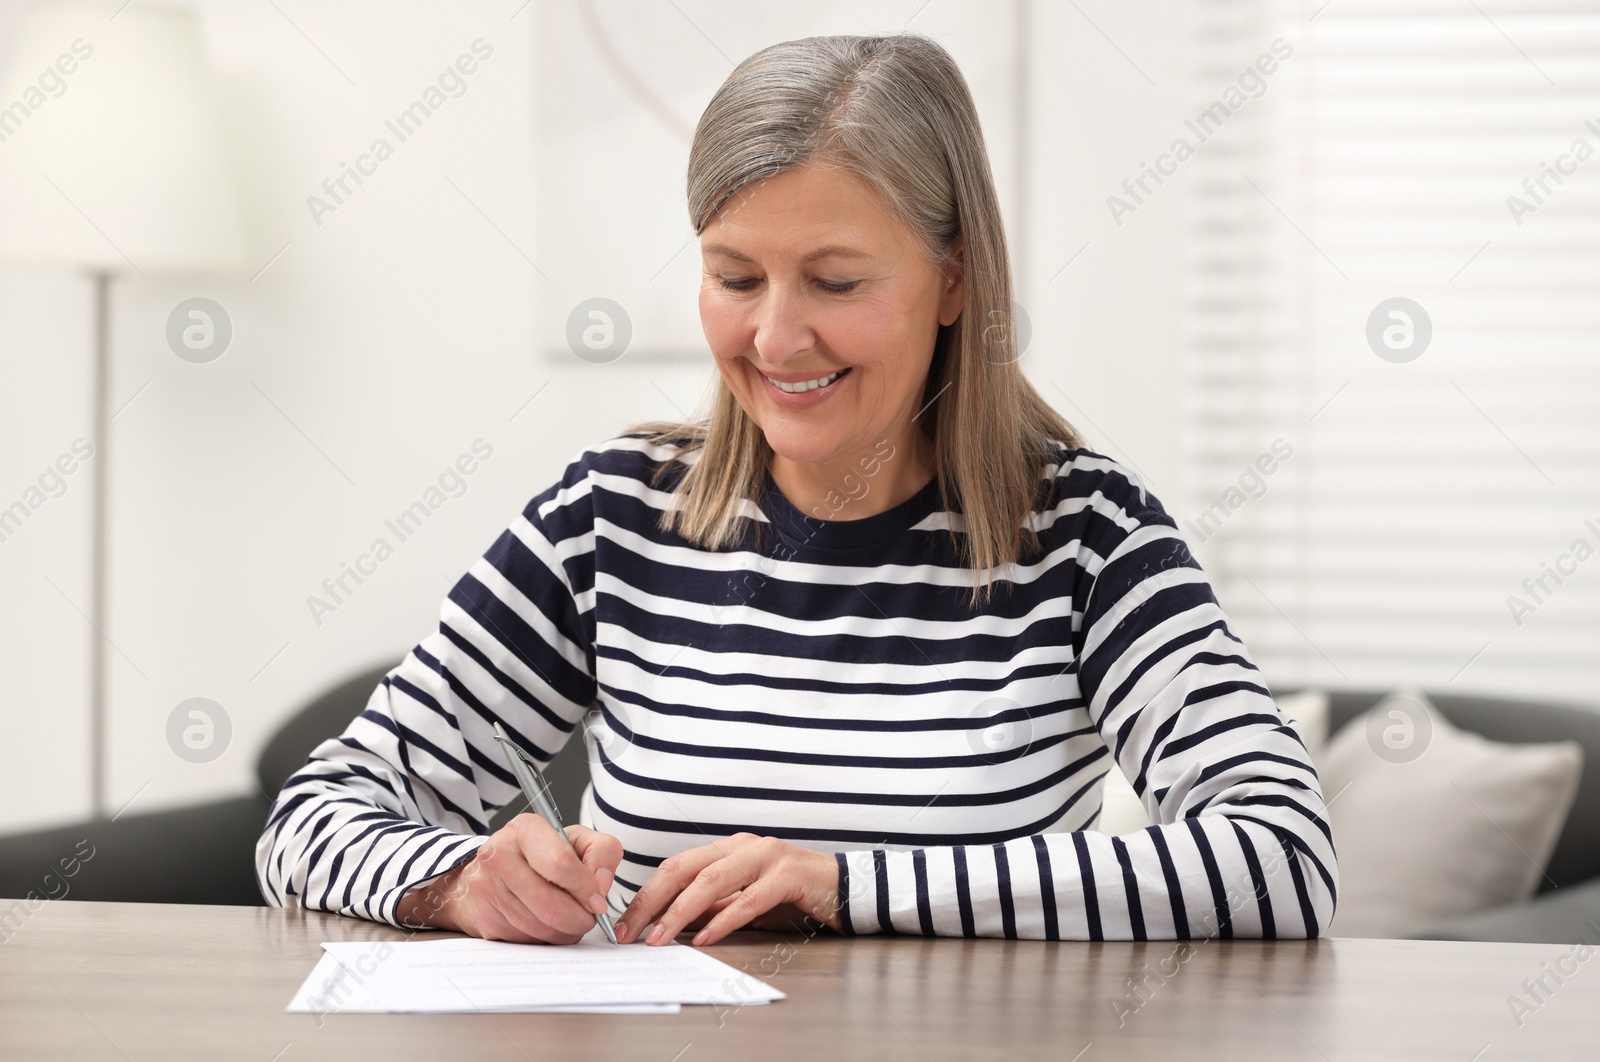 Photo of Smiling senior woman signing Last Will and Testament at wooden table indoors